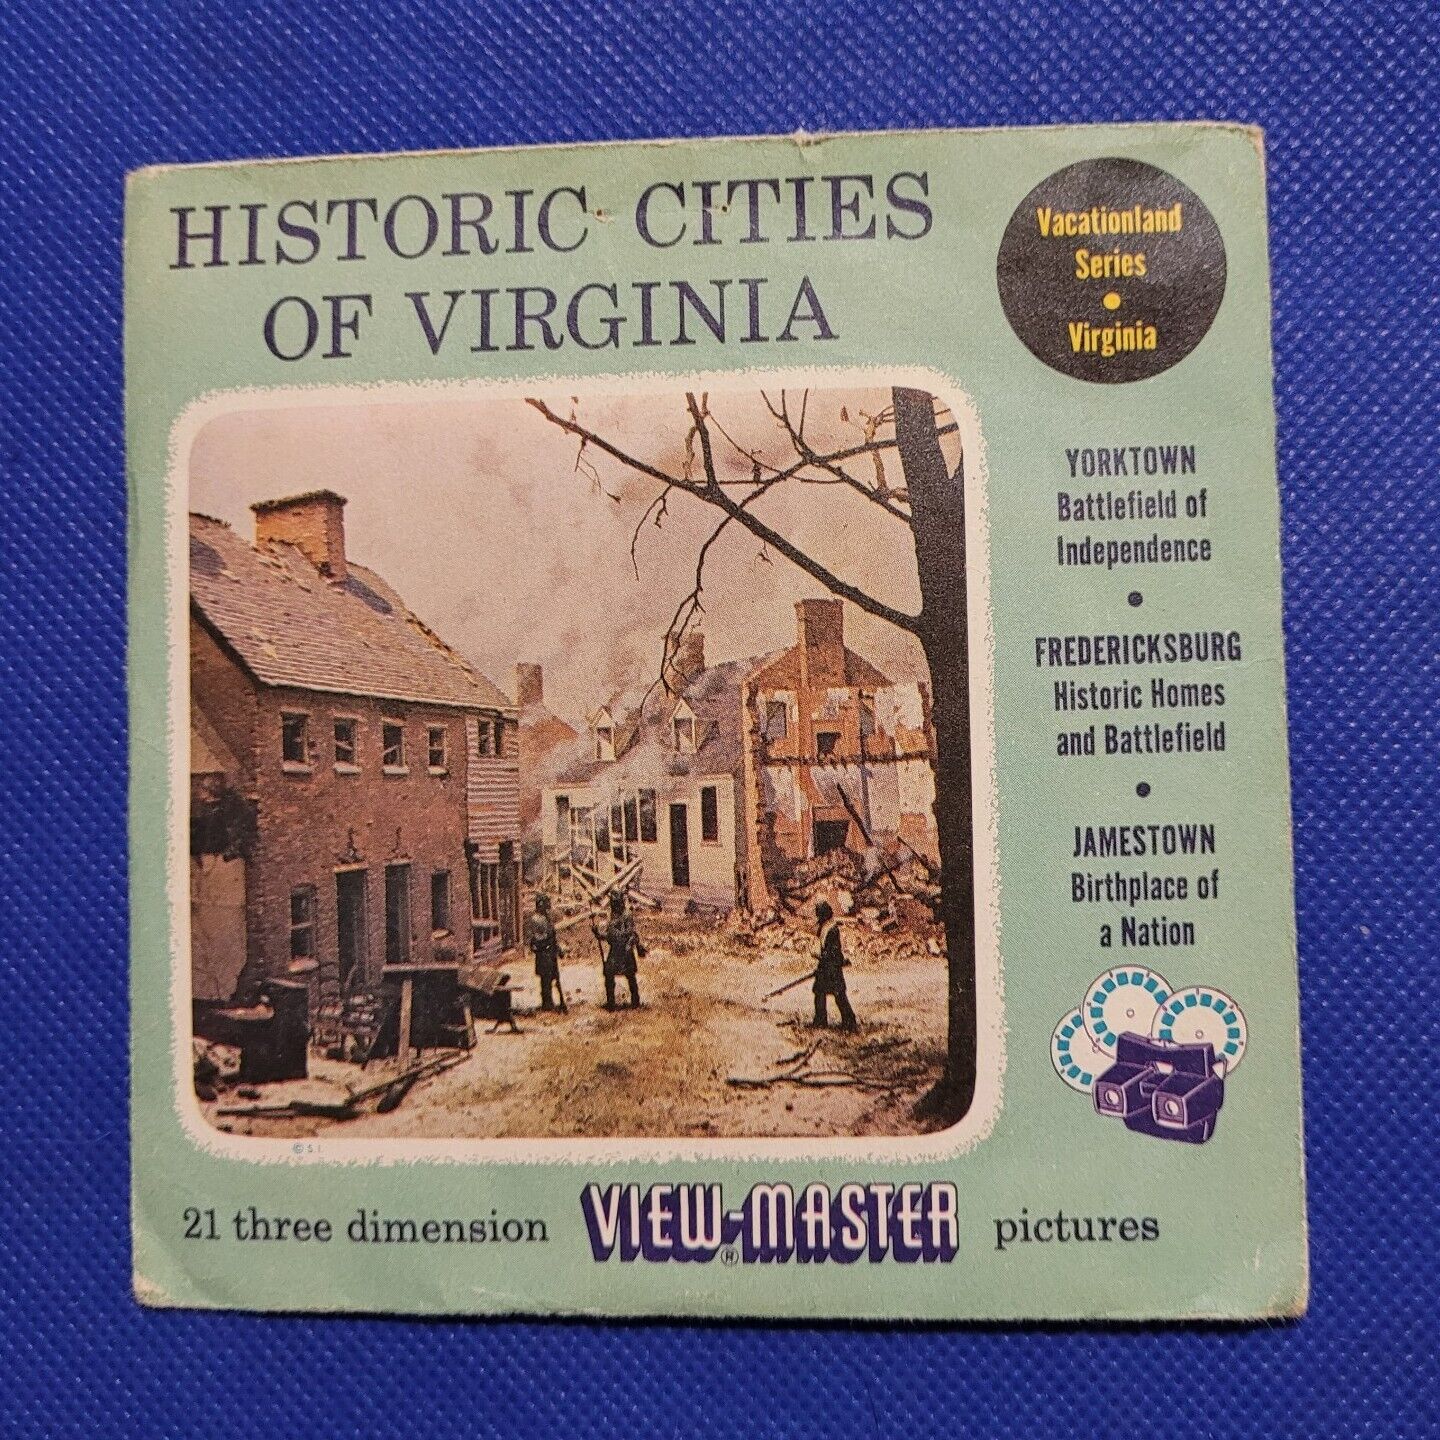 Scarce Sawyer's Historic Cities of Virginia 75 182 262 view-master Reels Packet